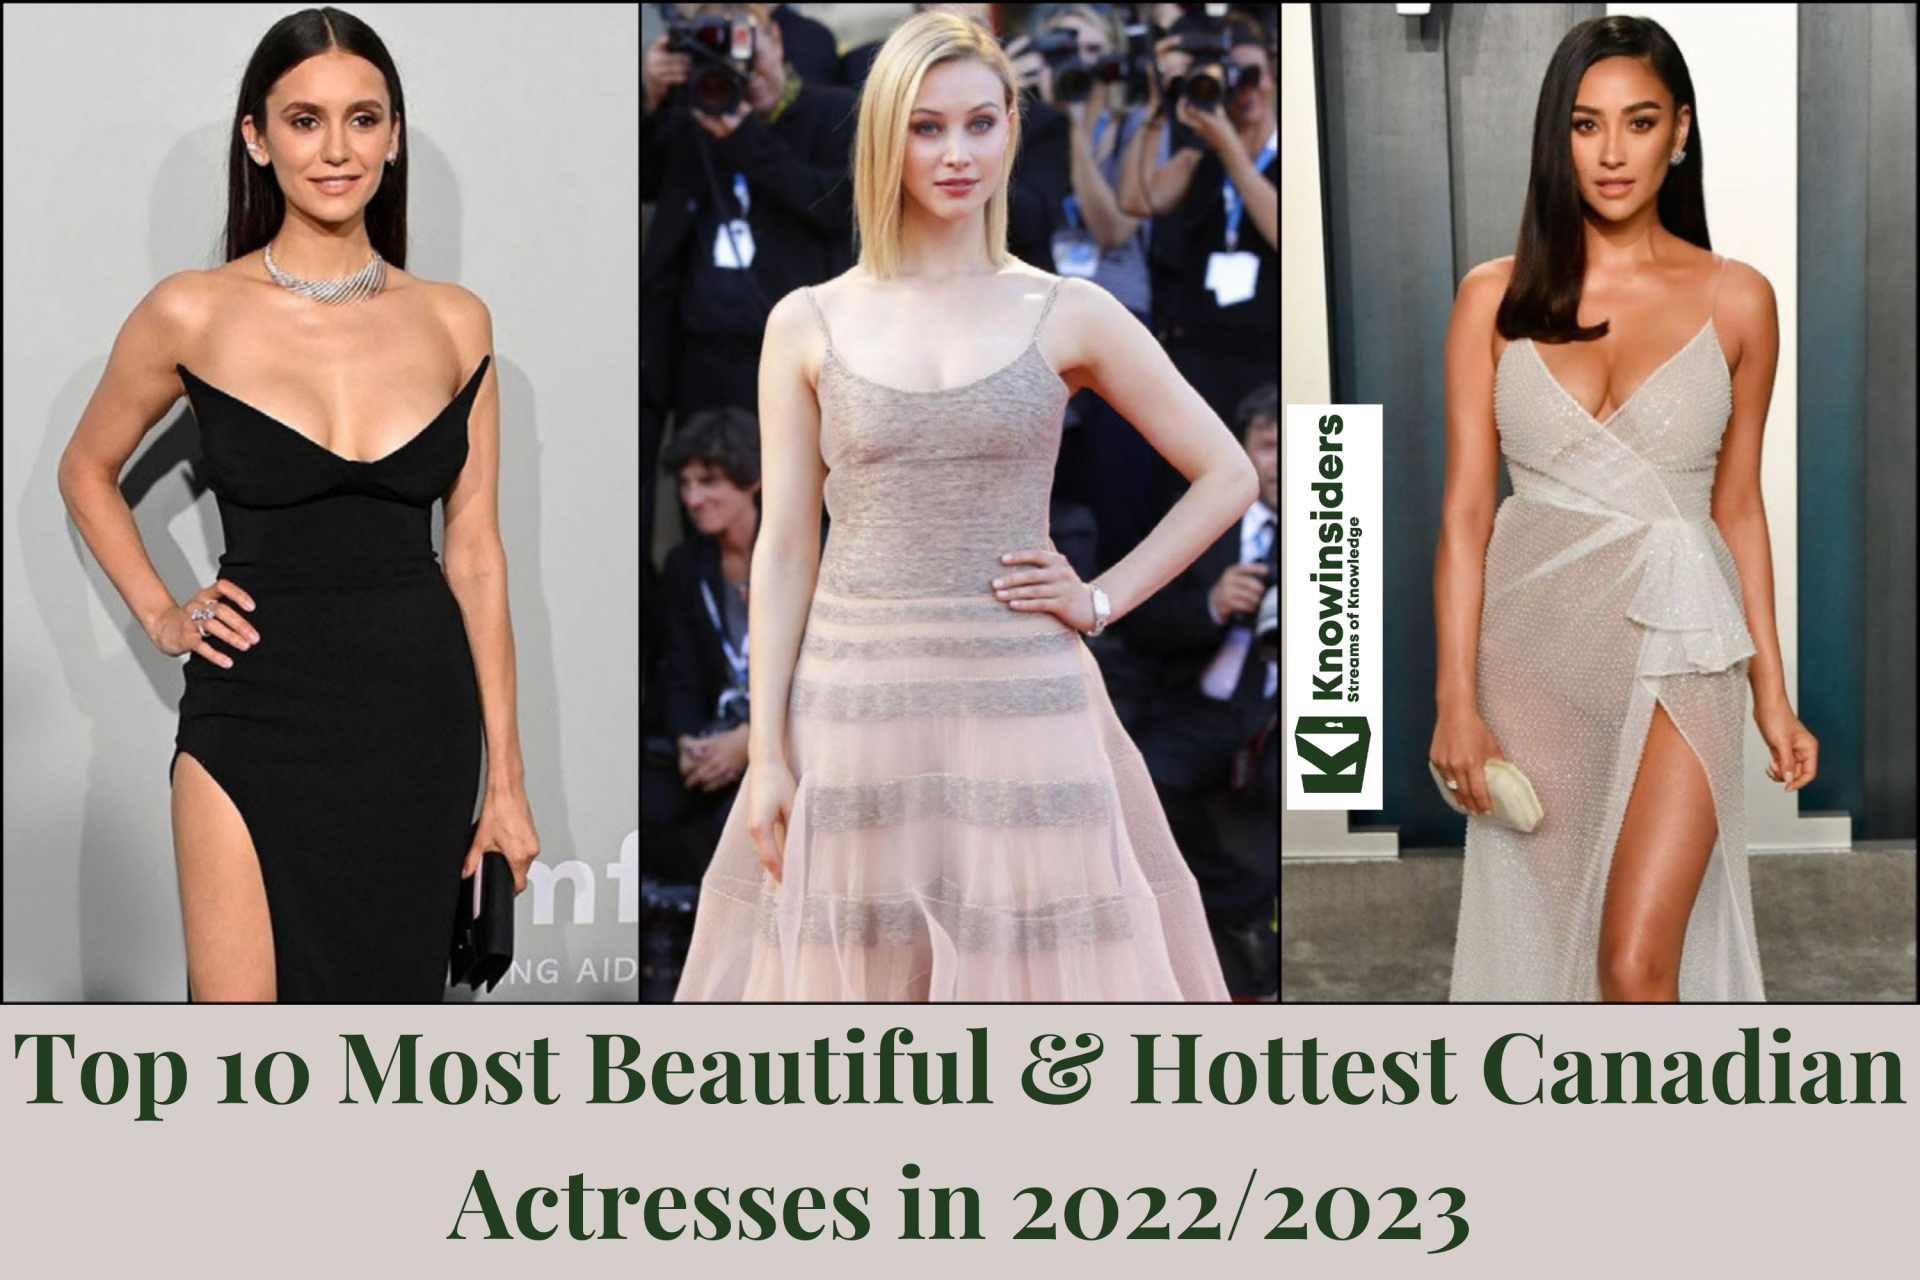 Top 10 Most Beautiful & Hottest Canadian Actresses in 2022/2023